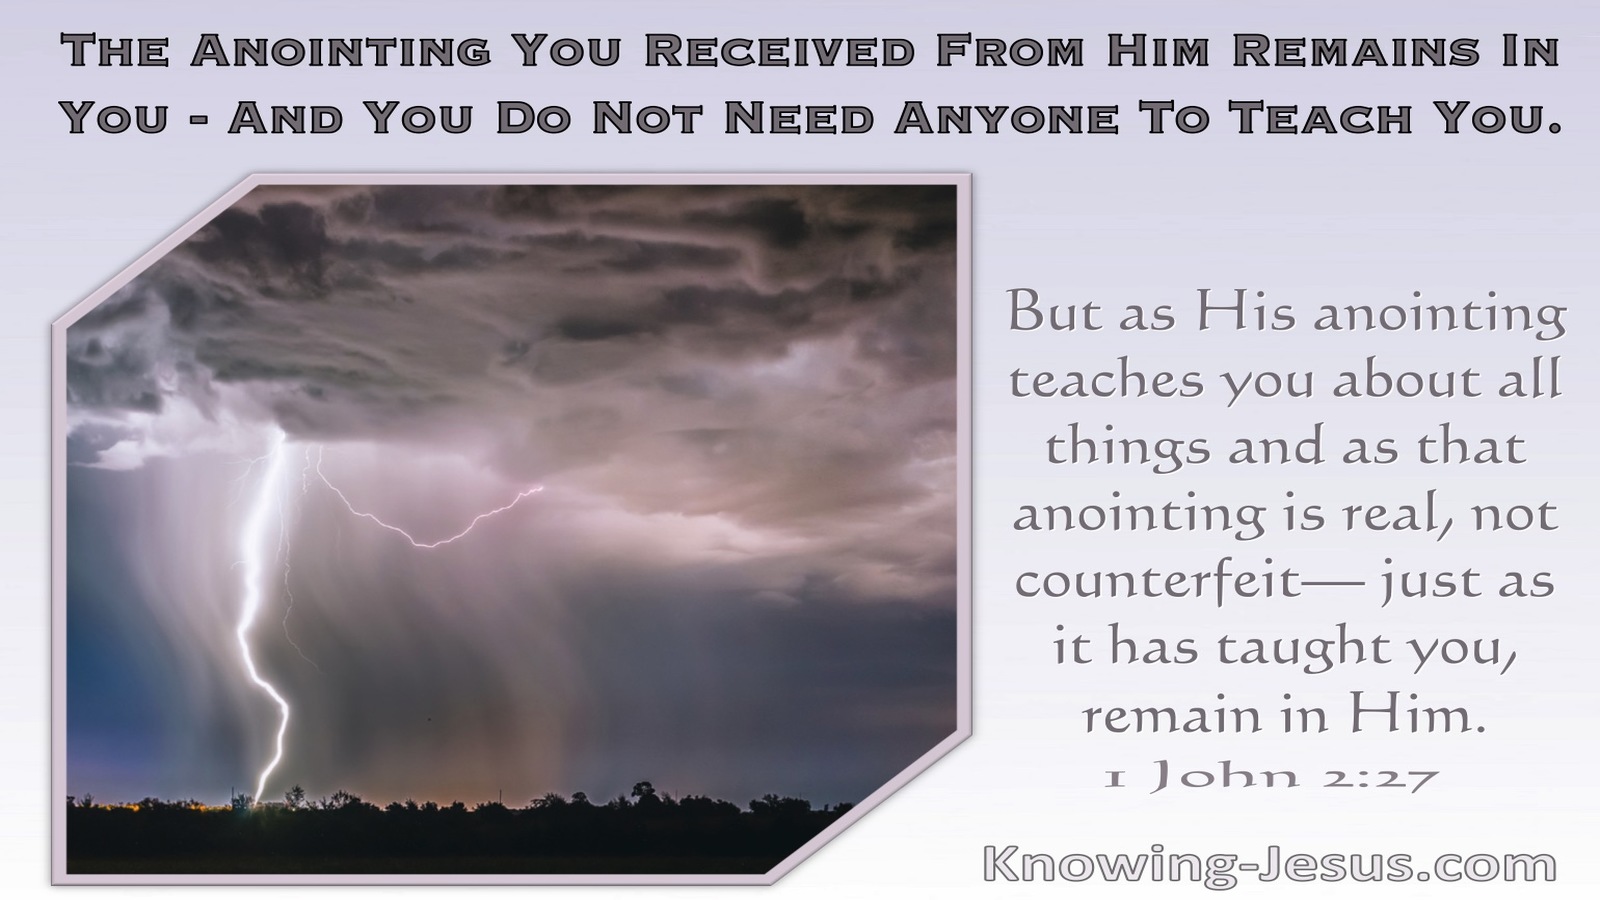 1 John 2:27 The Anointing You Received From Him Remains In You (windows)11:07